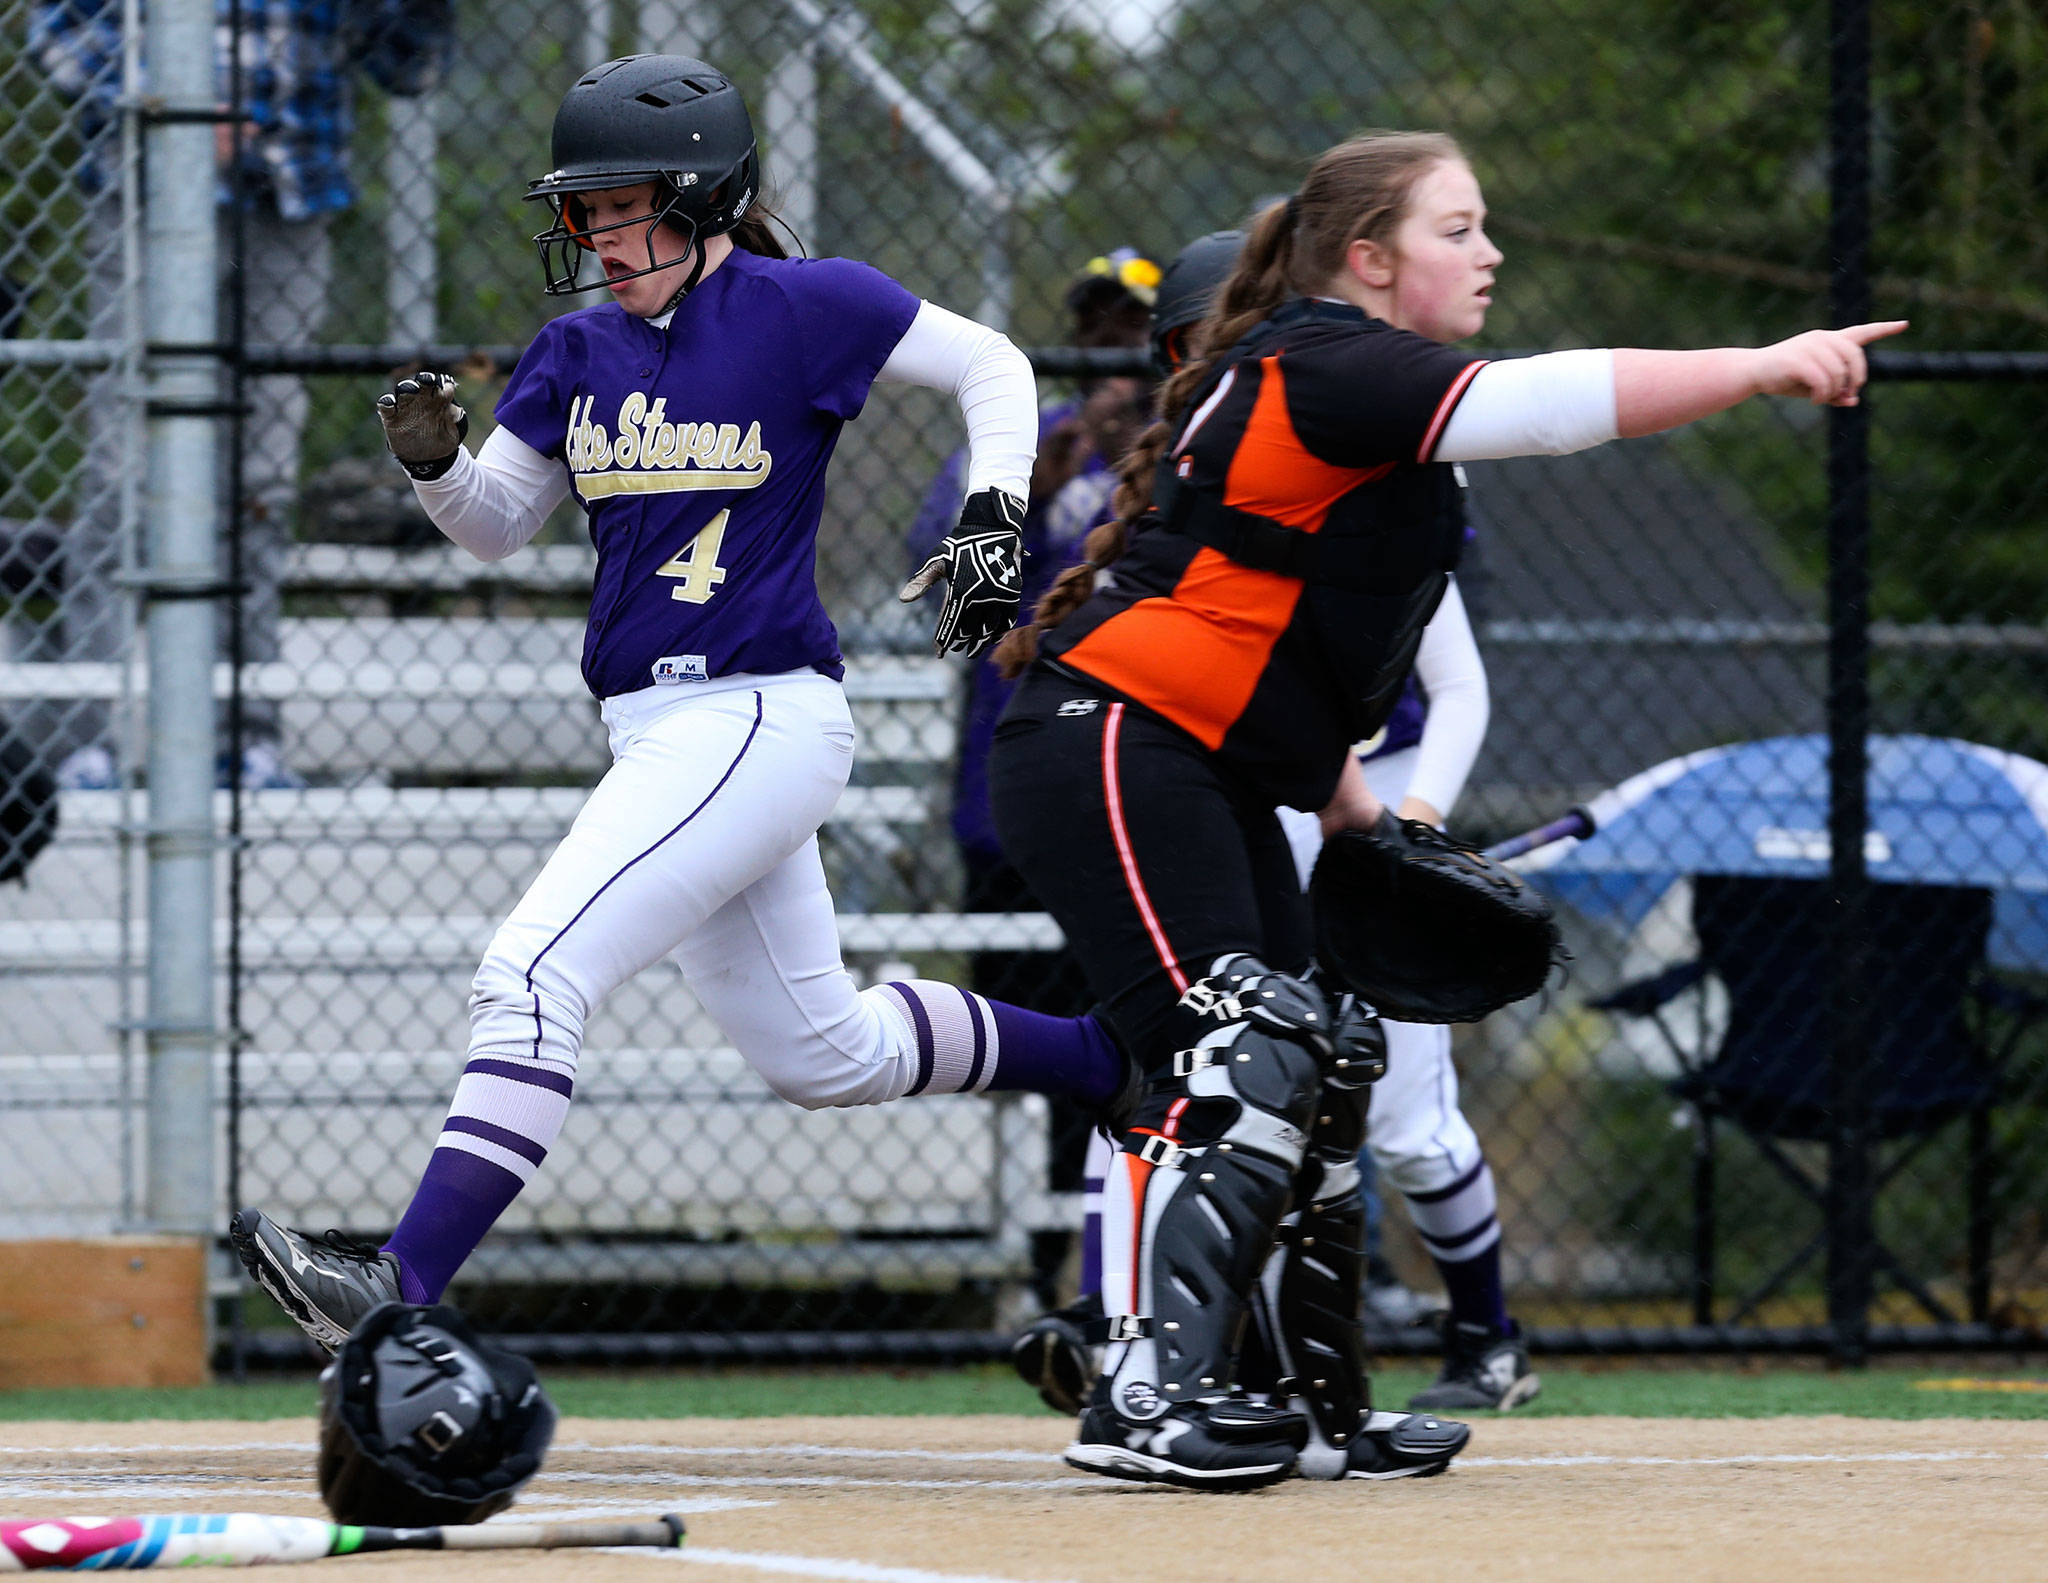 Lake Stevens’ Camryn Dubois scores a run as Monroe’s Taylor Durant points to second base during Monday’s game in Lake Stevens. (Andy Bronson / The Herald)